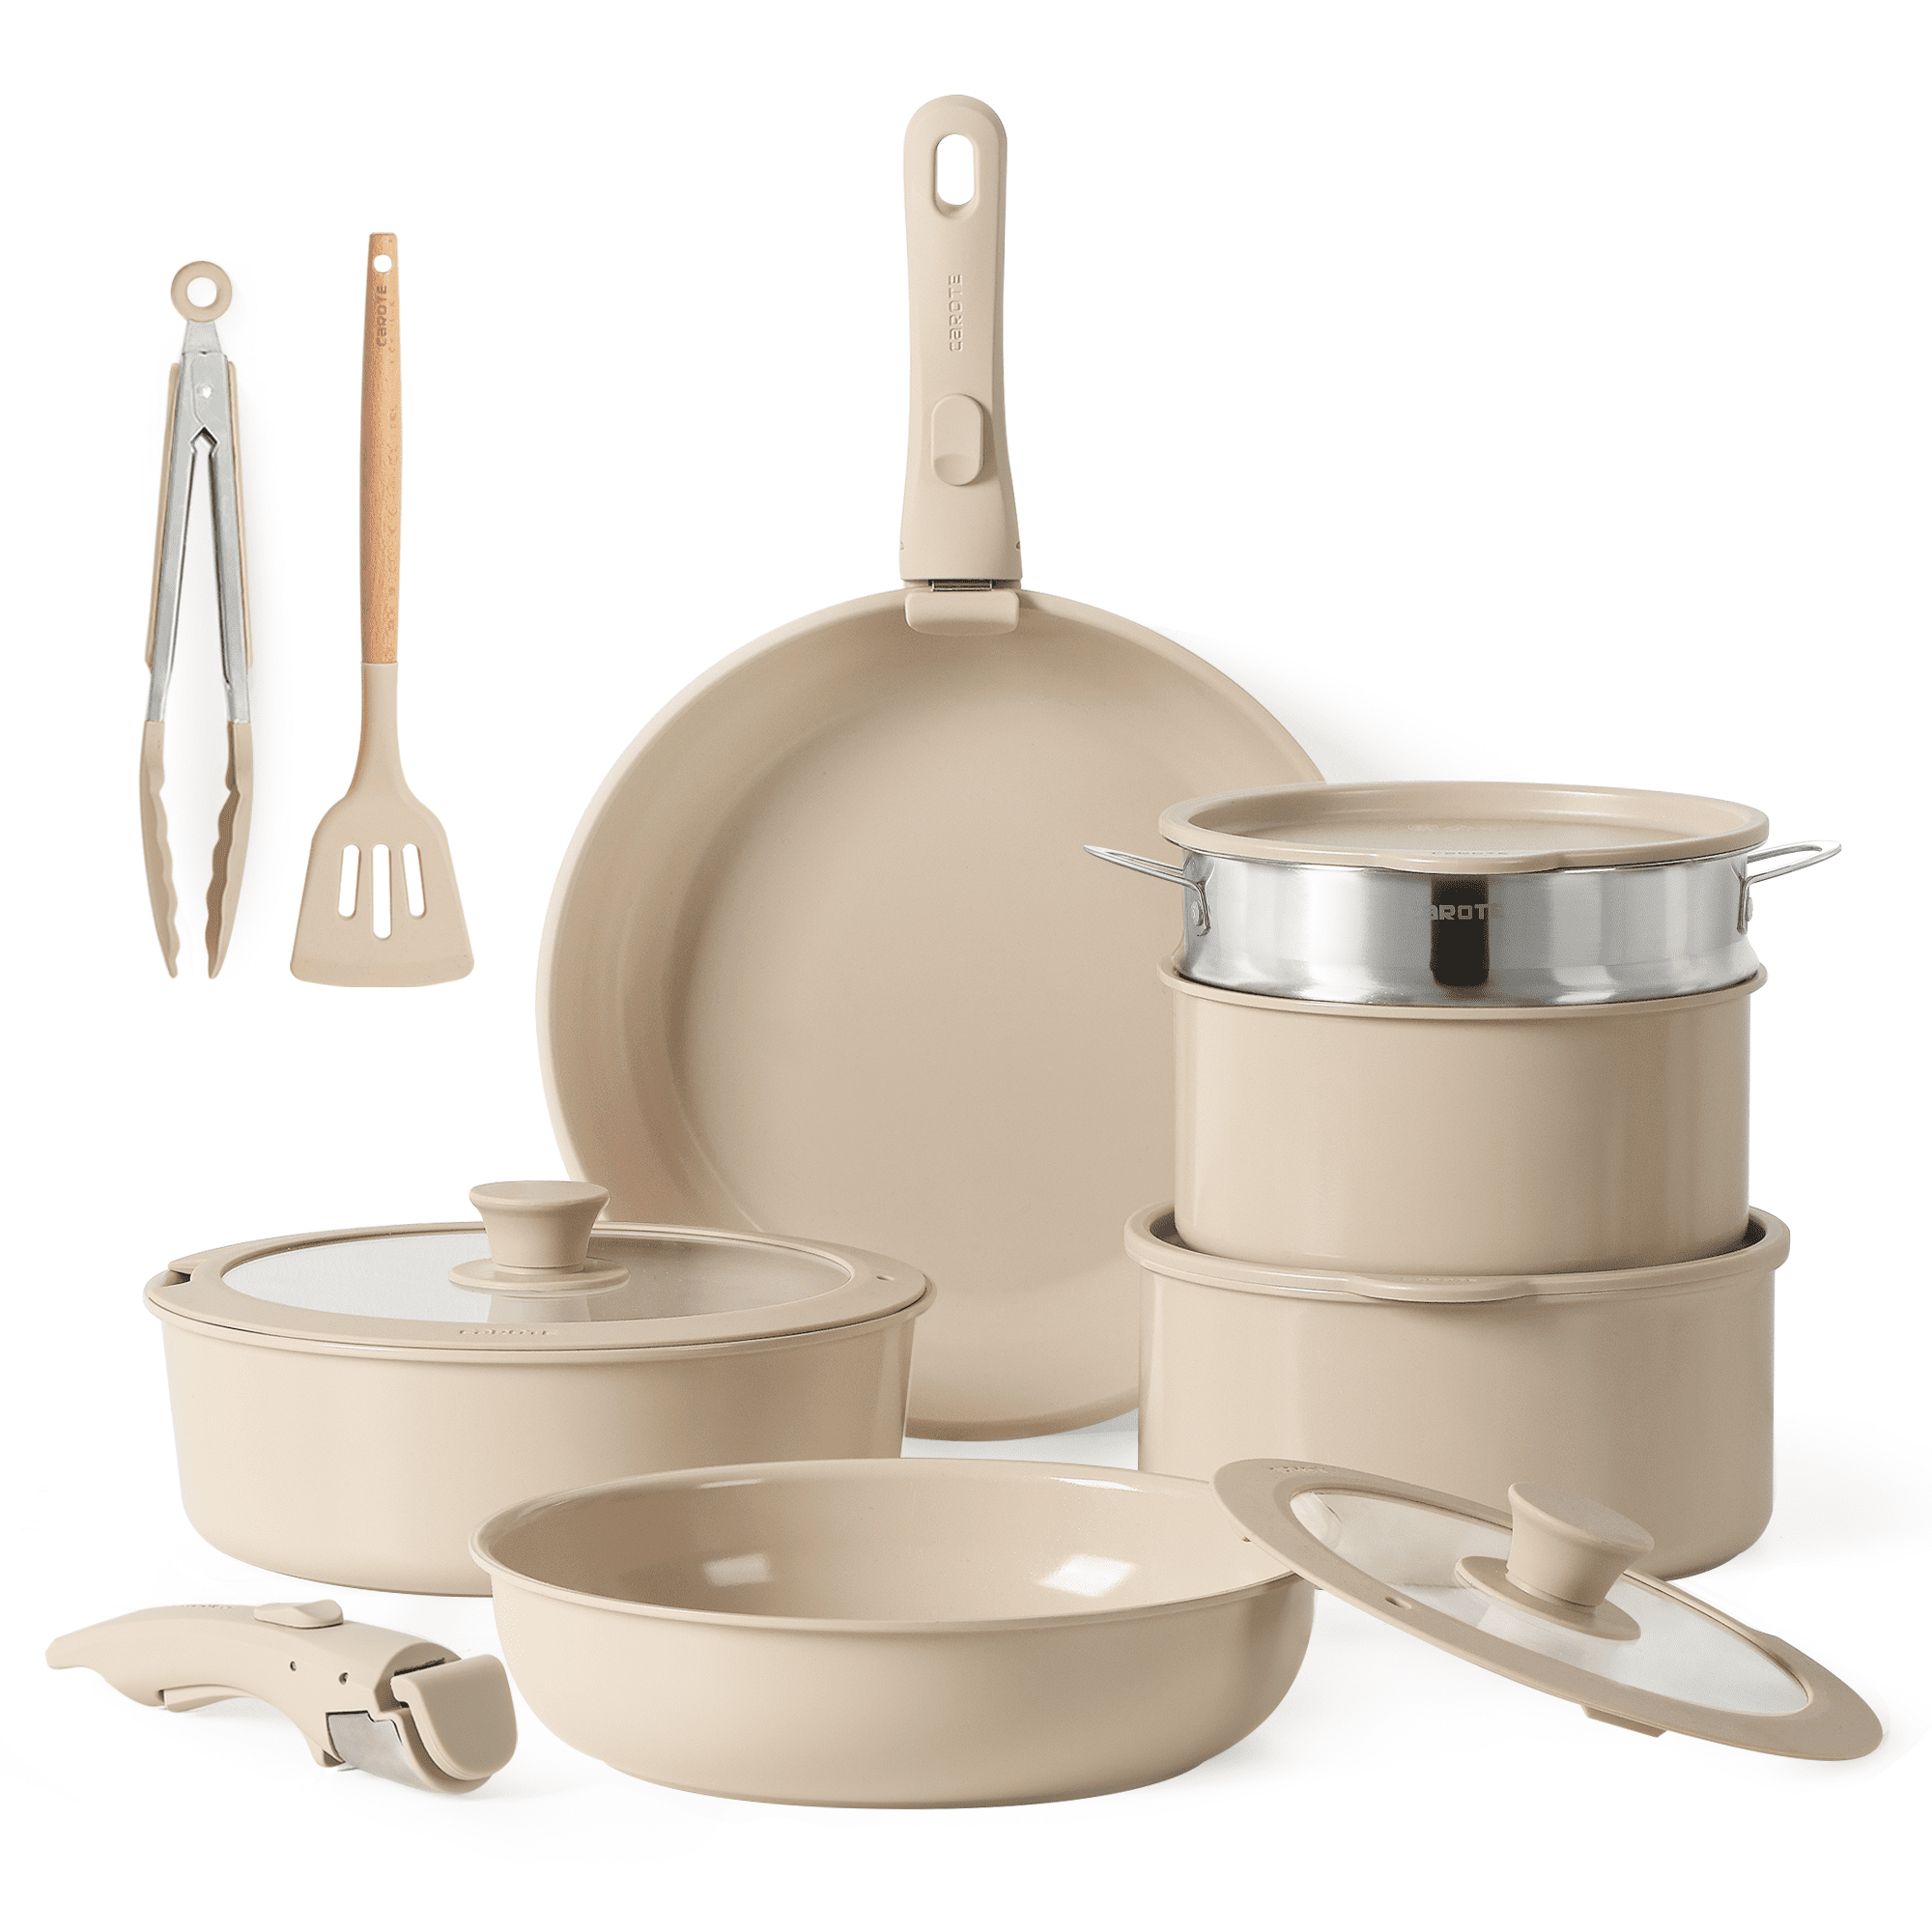 Carote cookware set review and unboxing